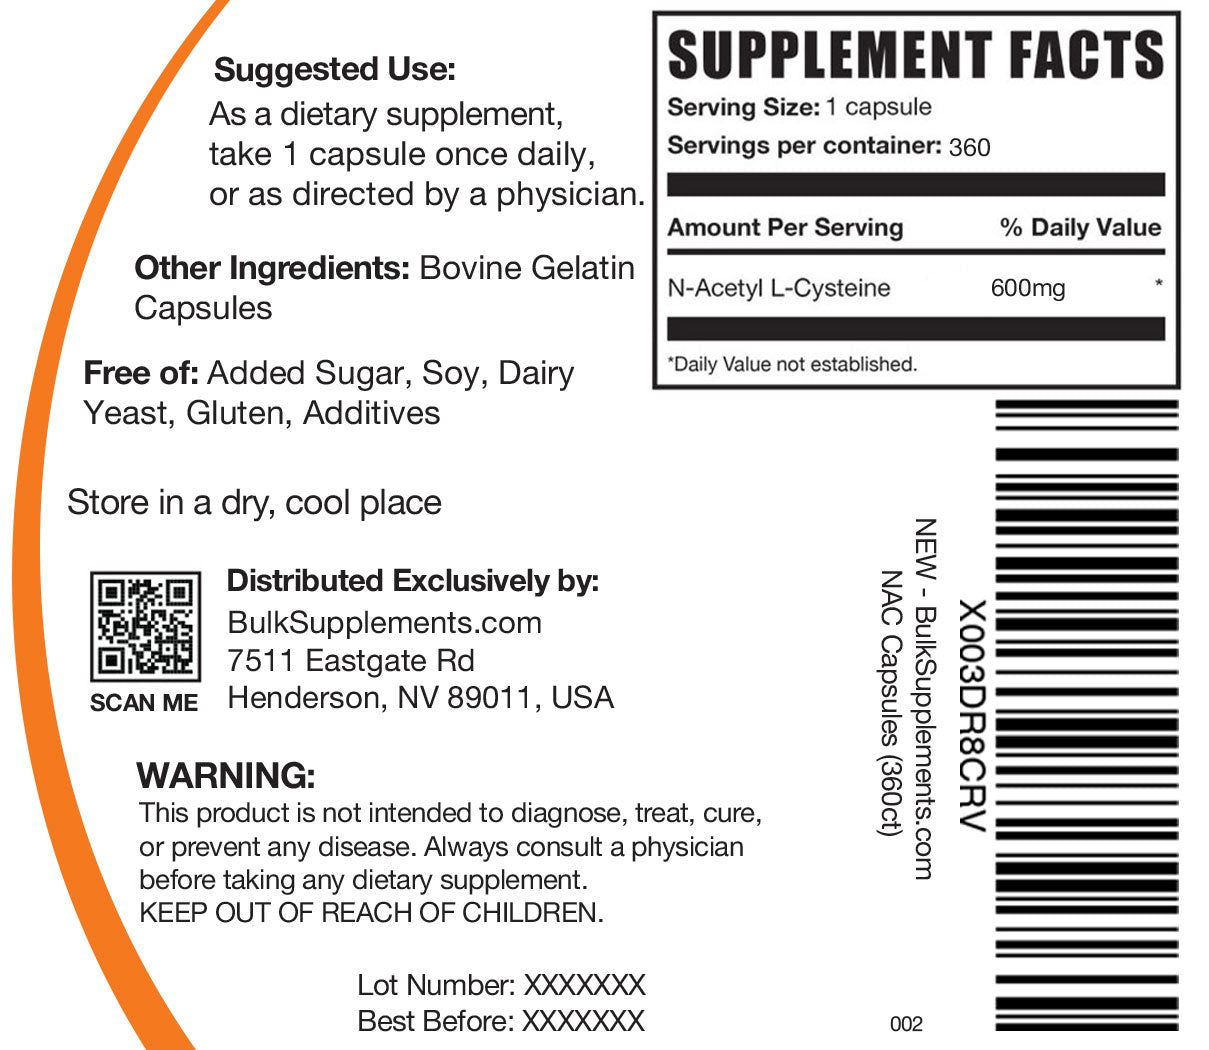 Supplement Facts NAC Capsules 600mg